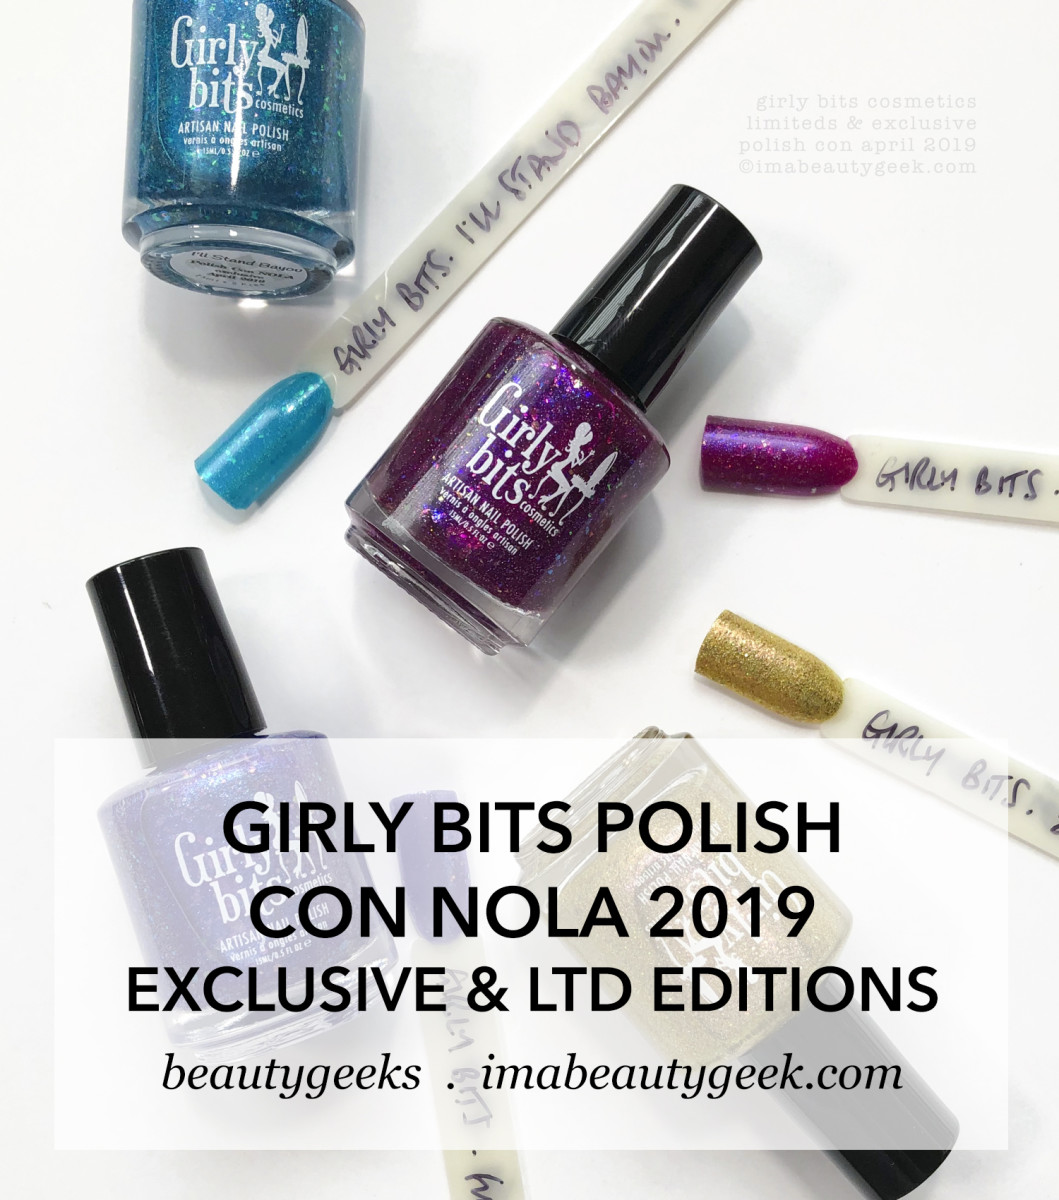 Girly Bits Cosmetics Polish Con April 2019 Limiteds and Exclusive Shades